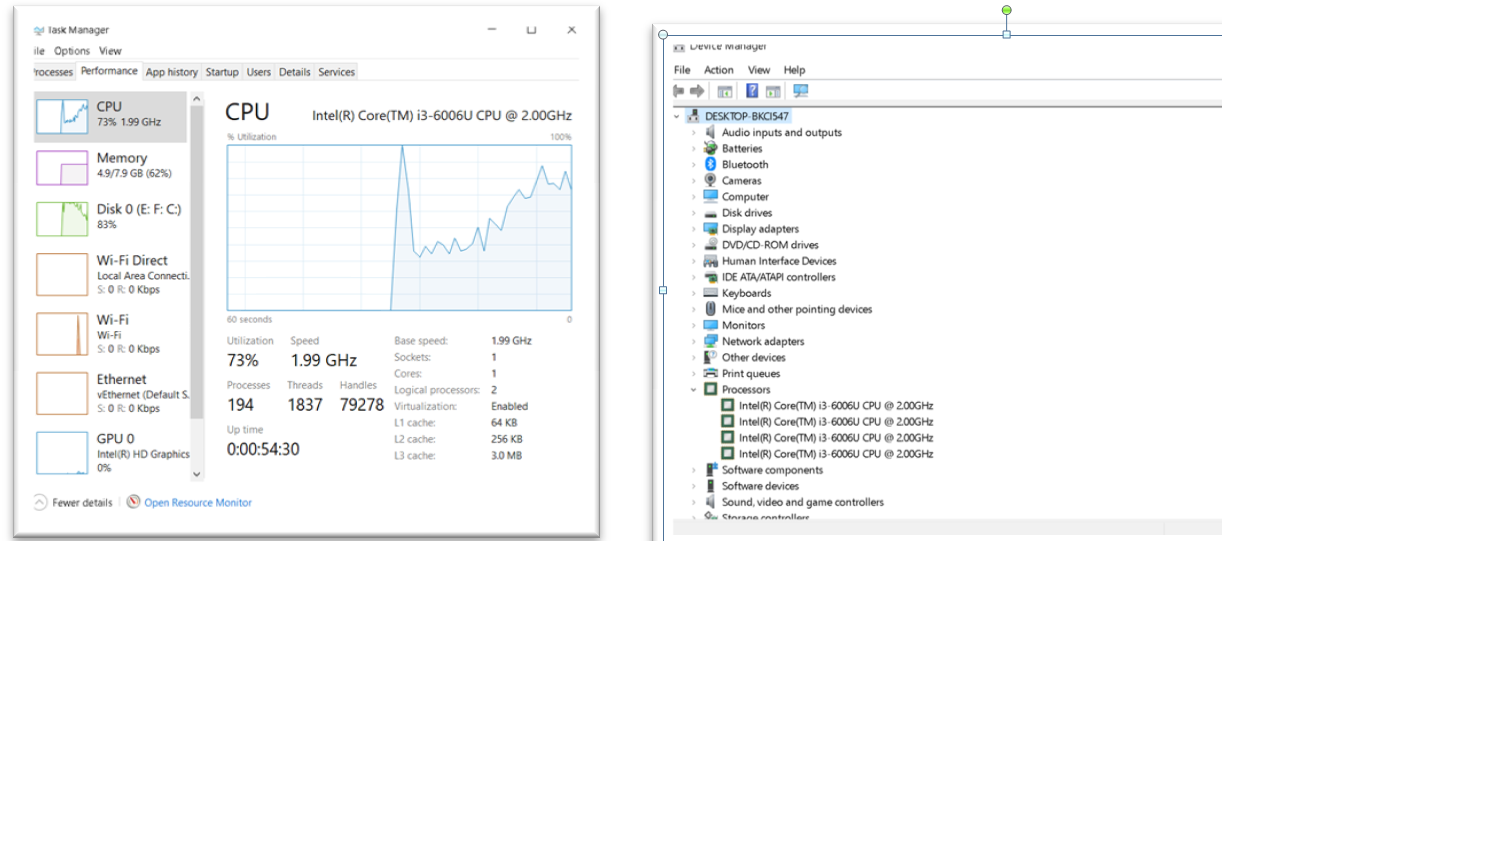 Number of processes core showing on task manager is wrong 5921da51-47bb-4ce4-bcab-5bdd1133346f?upload=true.png